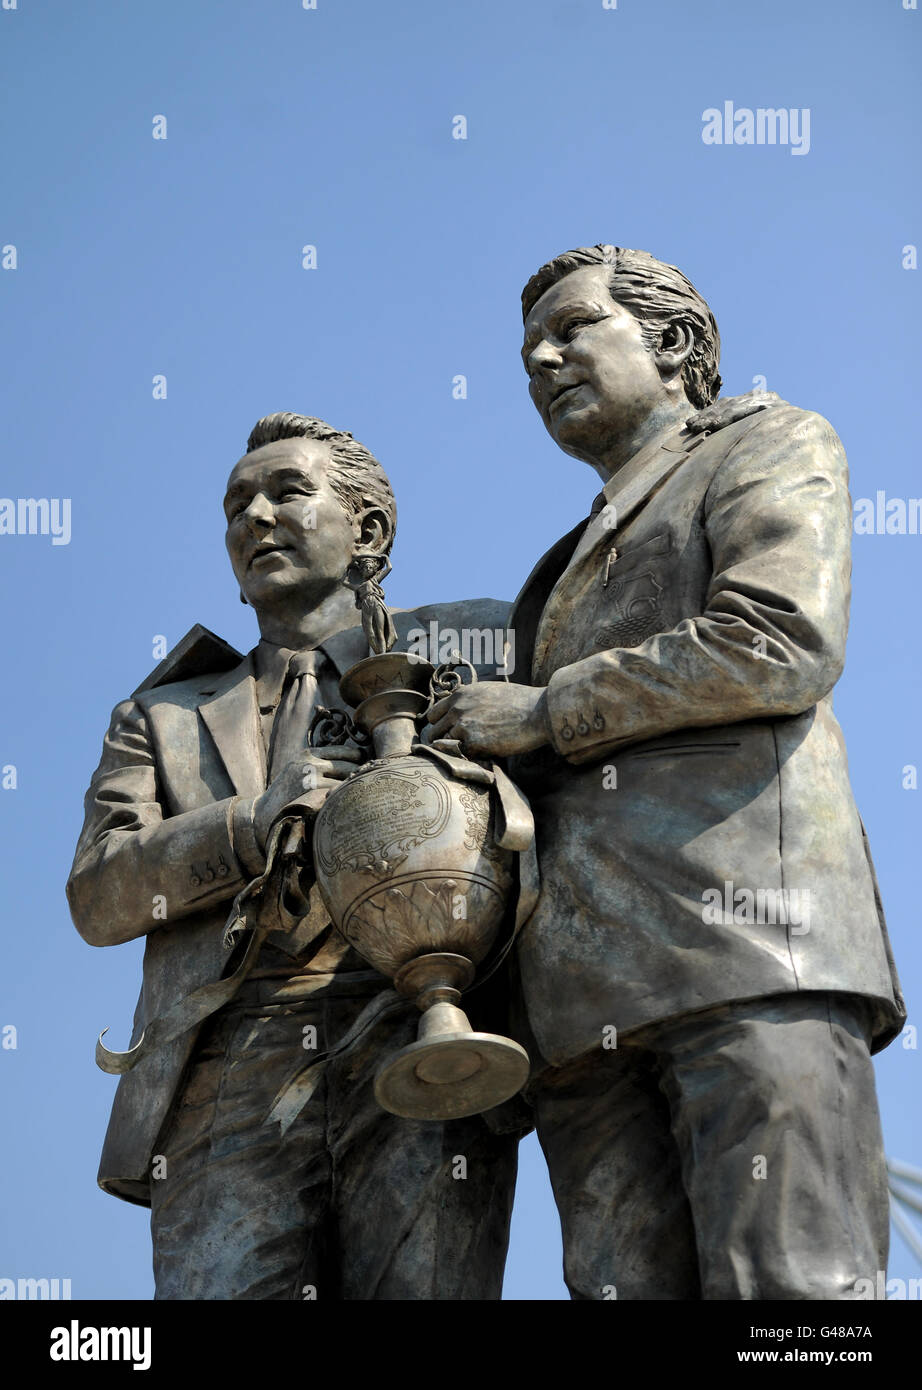 File:Clough and Taylor Statue Derby.JPG - Wikipedia